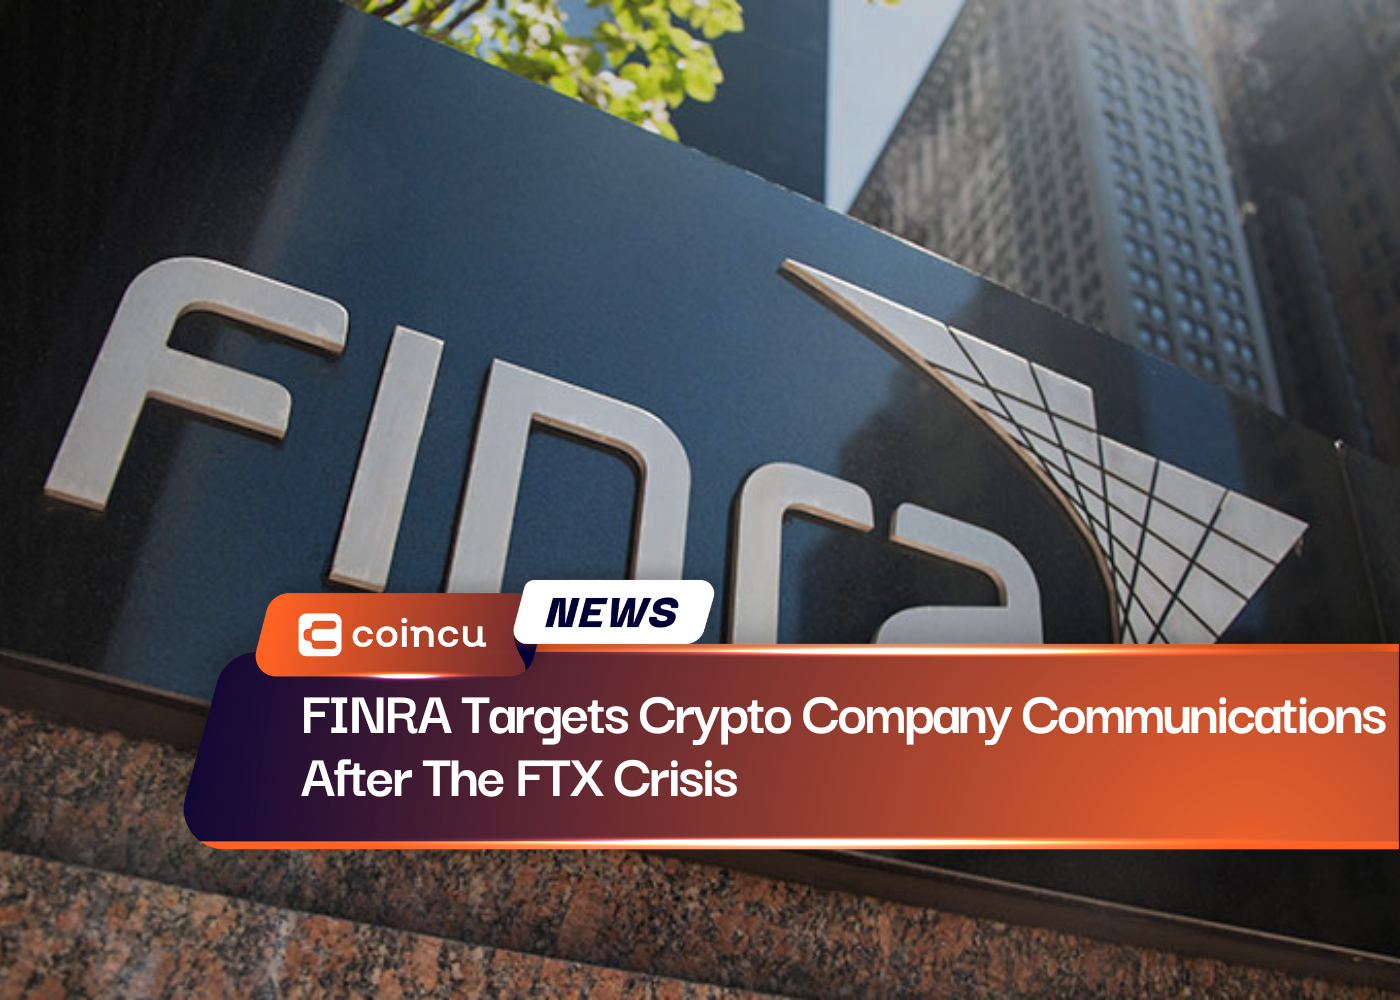 FINRA Targets Crypto Company Communications After The FTX Crisis